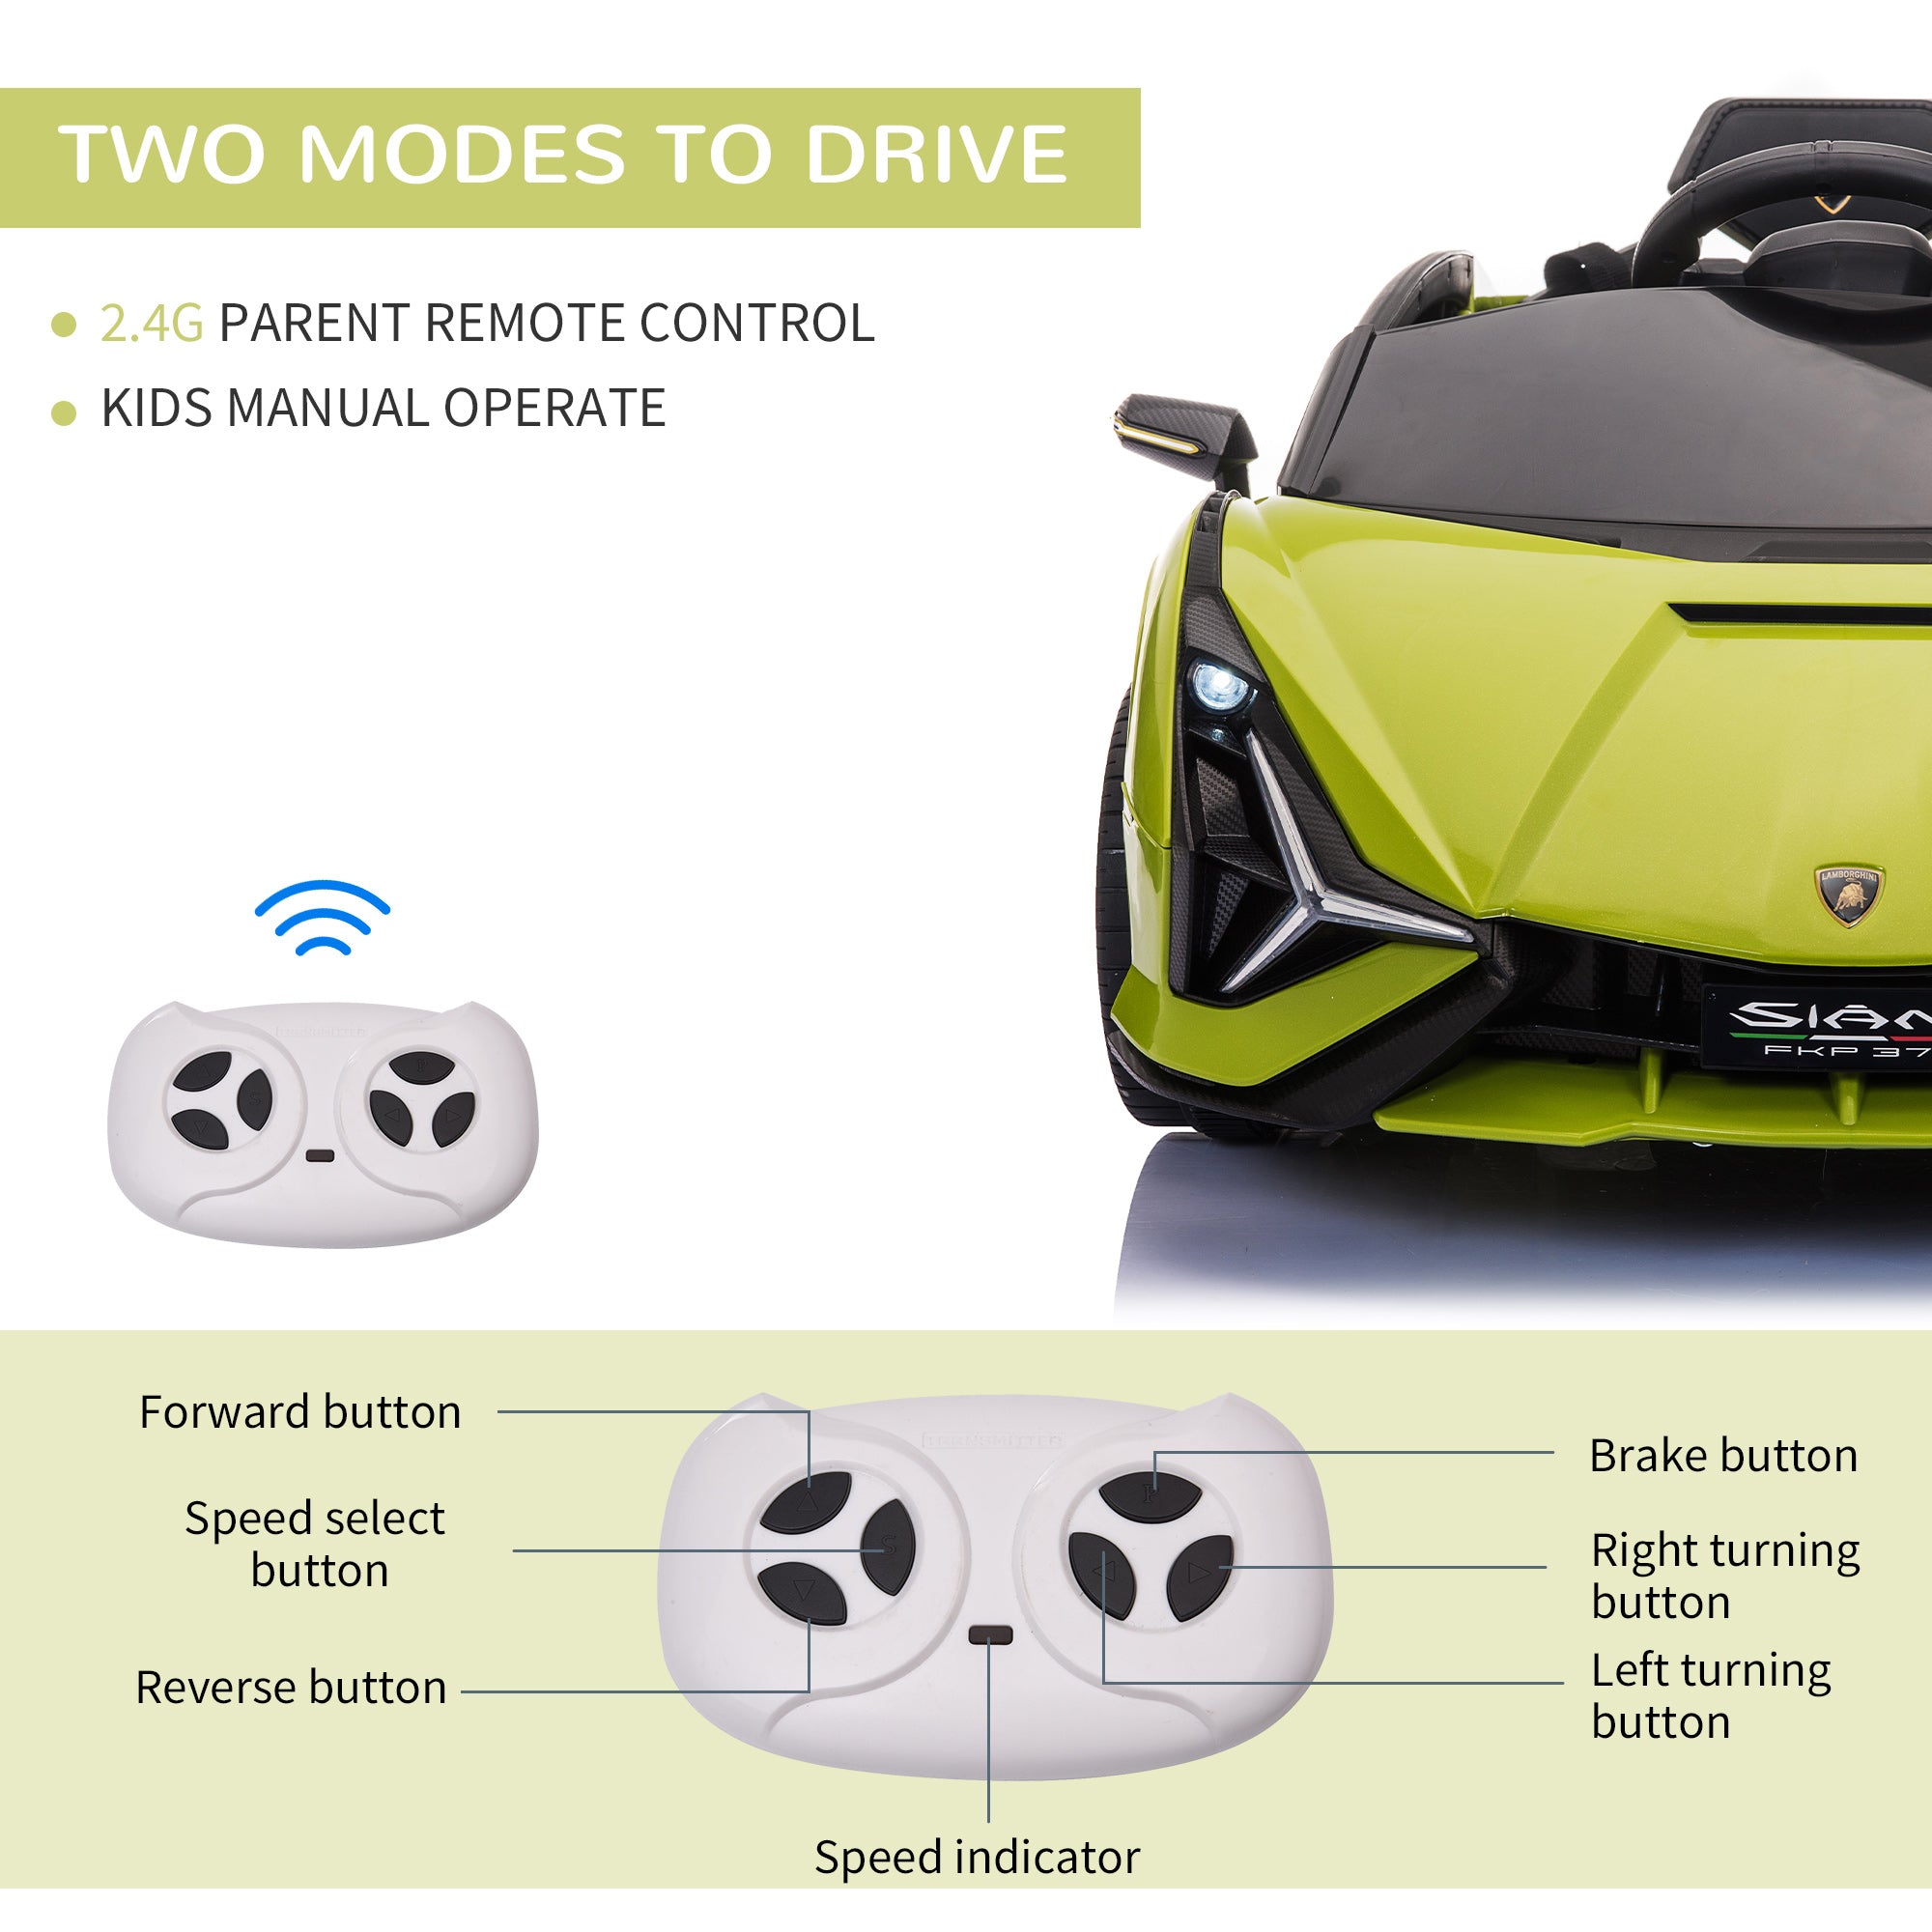 HOMCOM Compatible 12V Battery-powered Kids Electric Ride On Car Lamborghini SIAN Toy with Parental Remote Control Lights MP3 for 3-5 Years Old Green - Inspirely